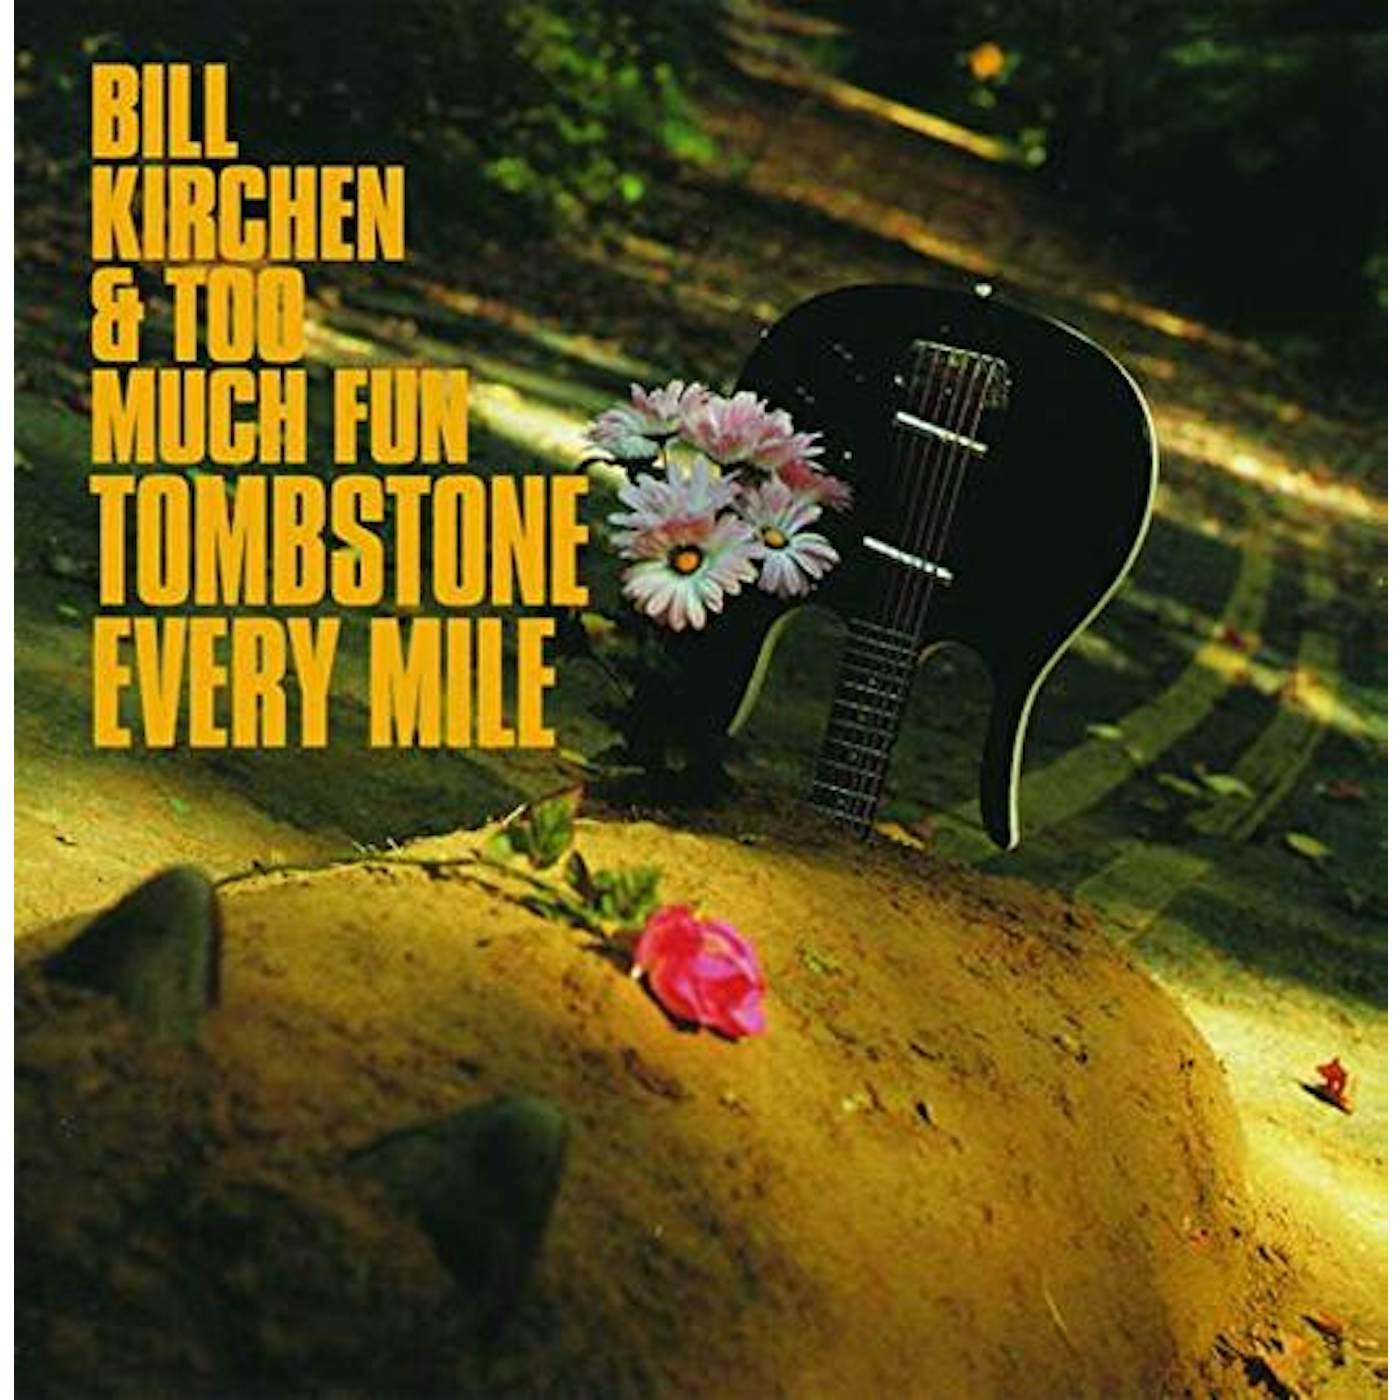 Bill Kirchen & Too Much Fun Tombstone Every Mile Vinyl Record